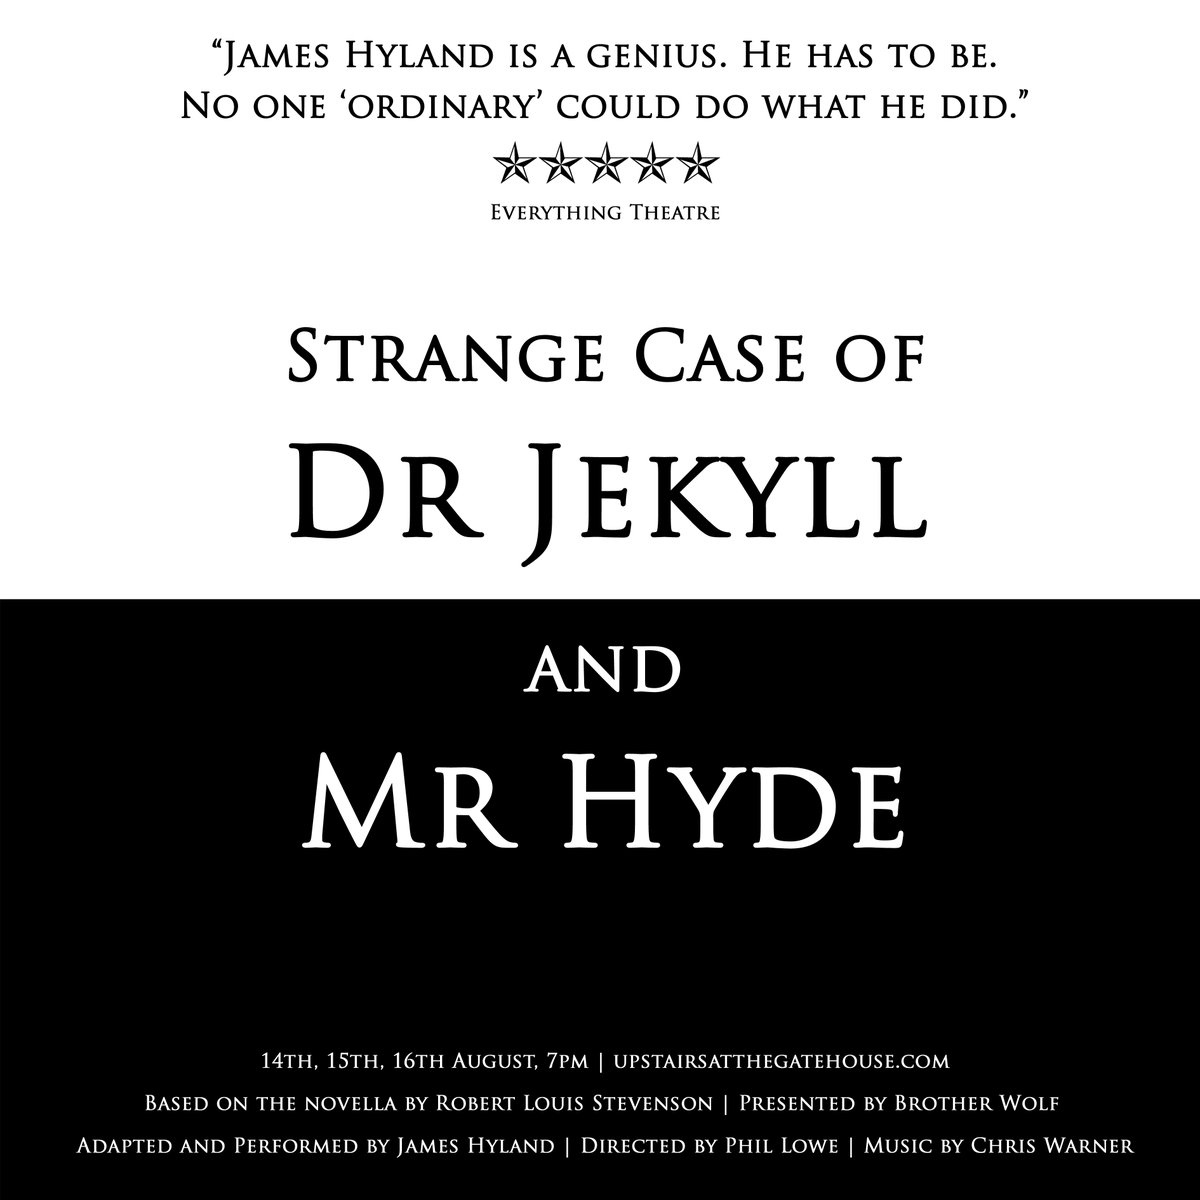 'one of the best monologue performances on stage' ~British Theatre Guide 14th, 15th, 16th August, 7pm at @GatehouseLondon as part of @CamdenFringe TIX: brotherwolf.org.uk/theatre-perfor… #JekyllandHyde #RobertLouisStevenson #GothicHorror #OneManShow #CamdenFringe